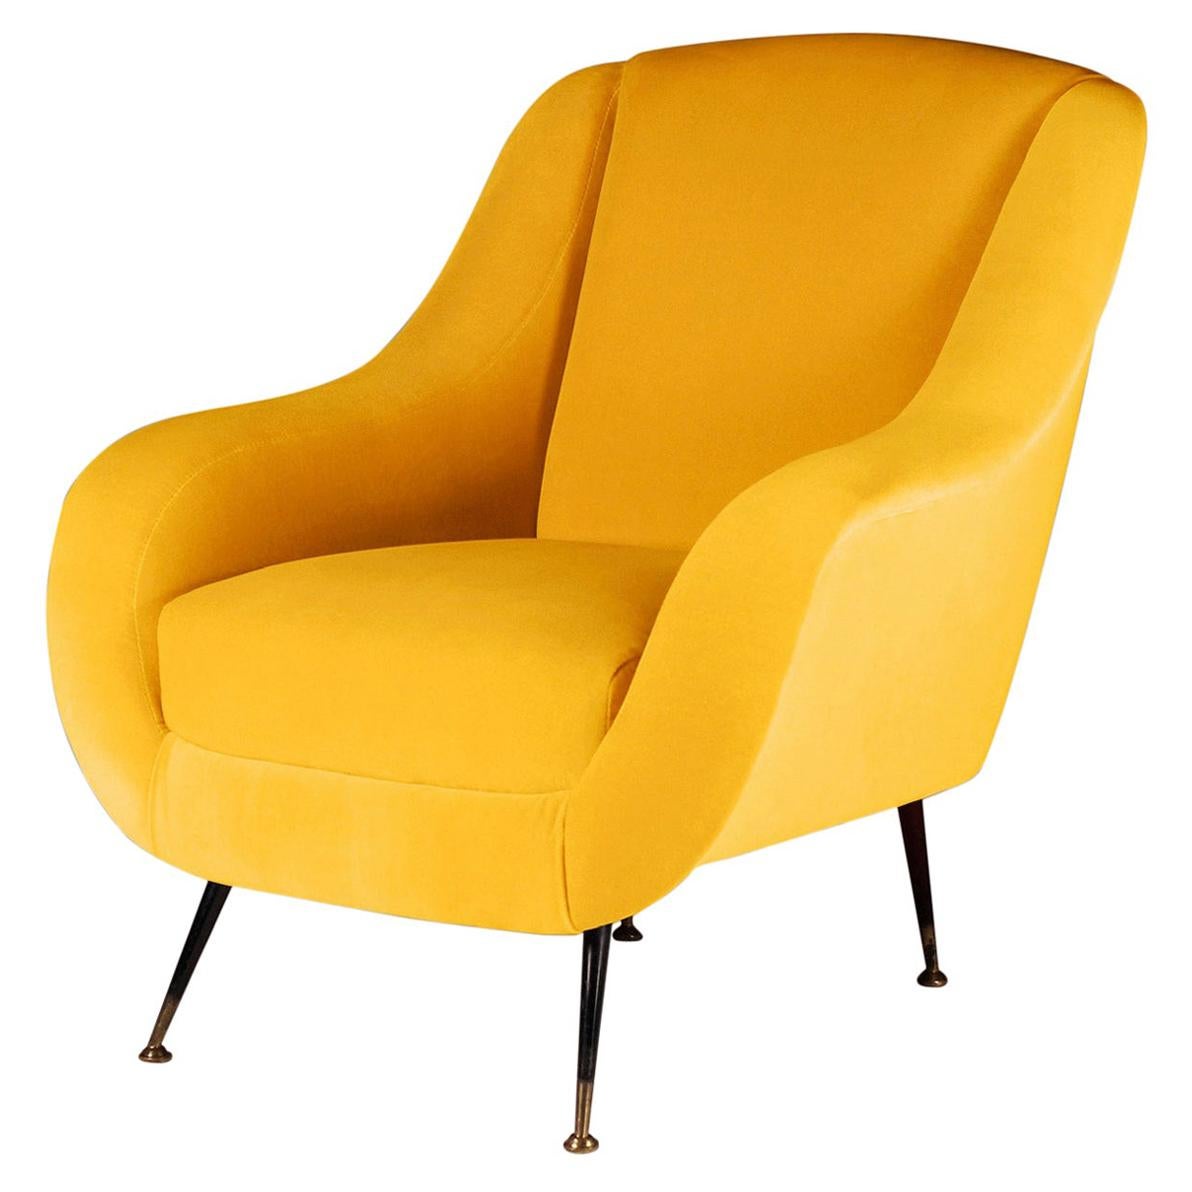 Pair of Mid-Century Modern Style Italian Lounge Chairs in Yellow For Sale